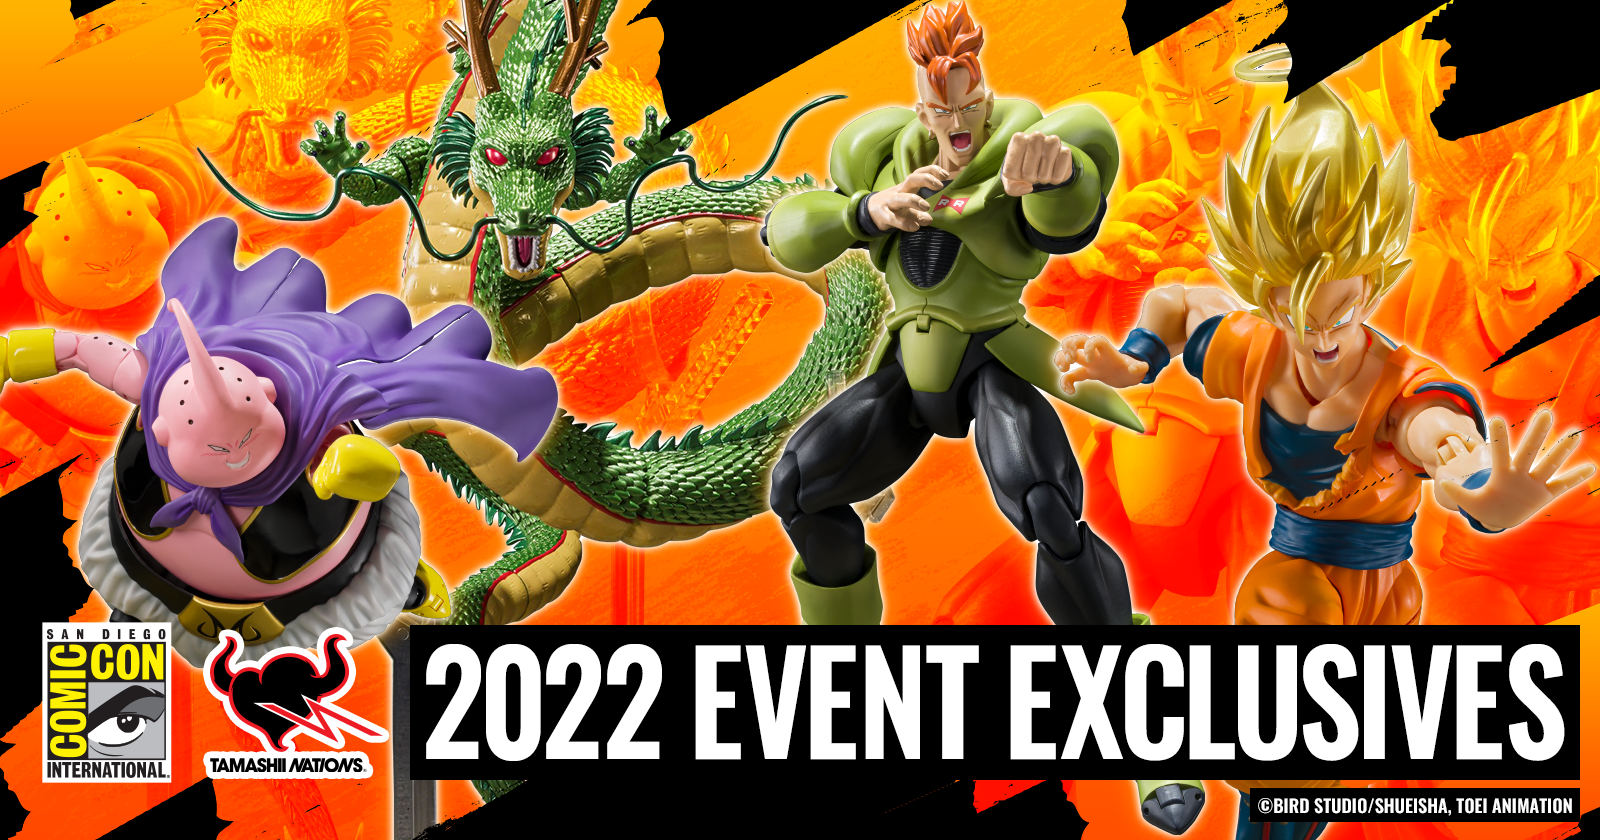 North America Info] New Exclusive Items from TAMASHII NATIONS Coming to  Comic-Con International San Diego!]